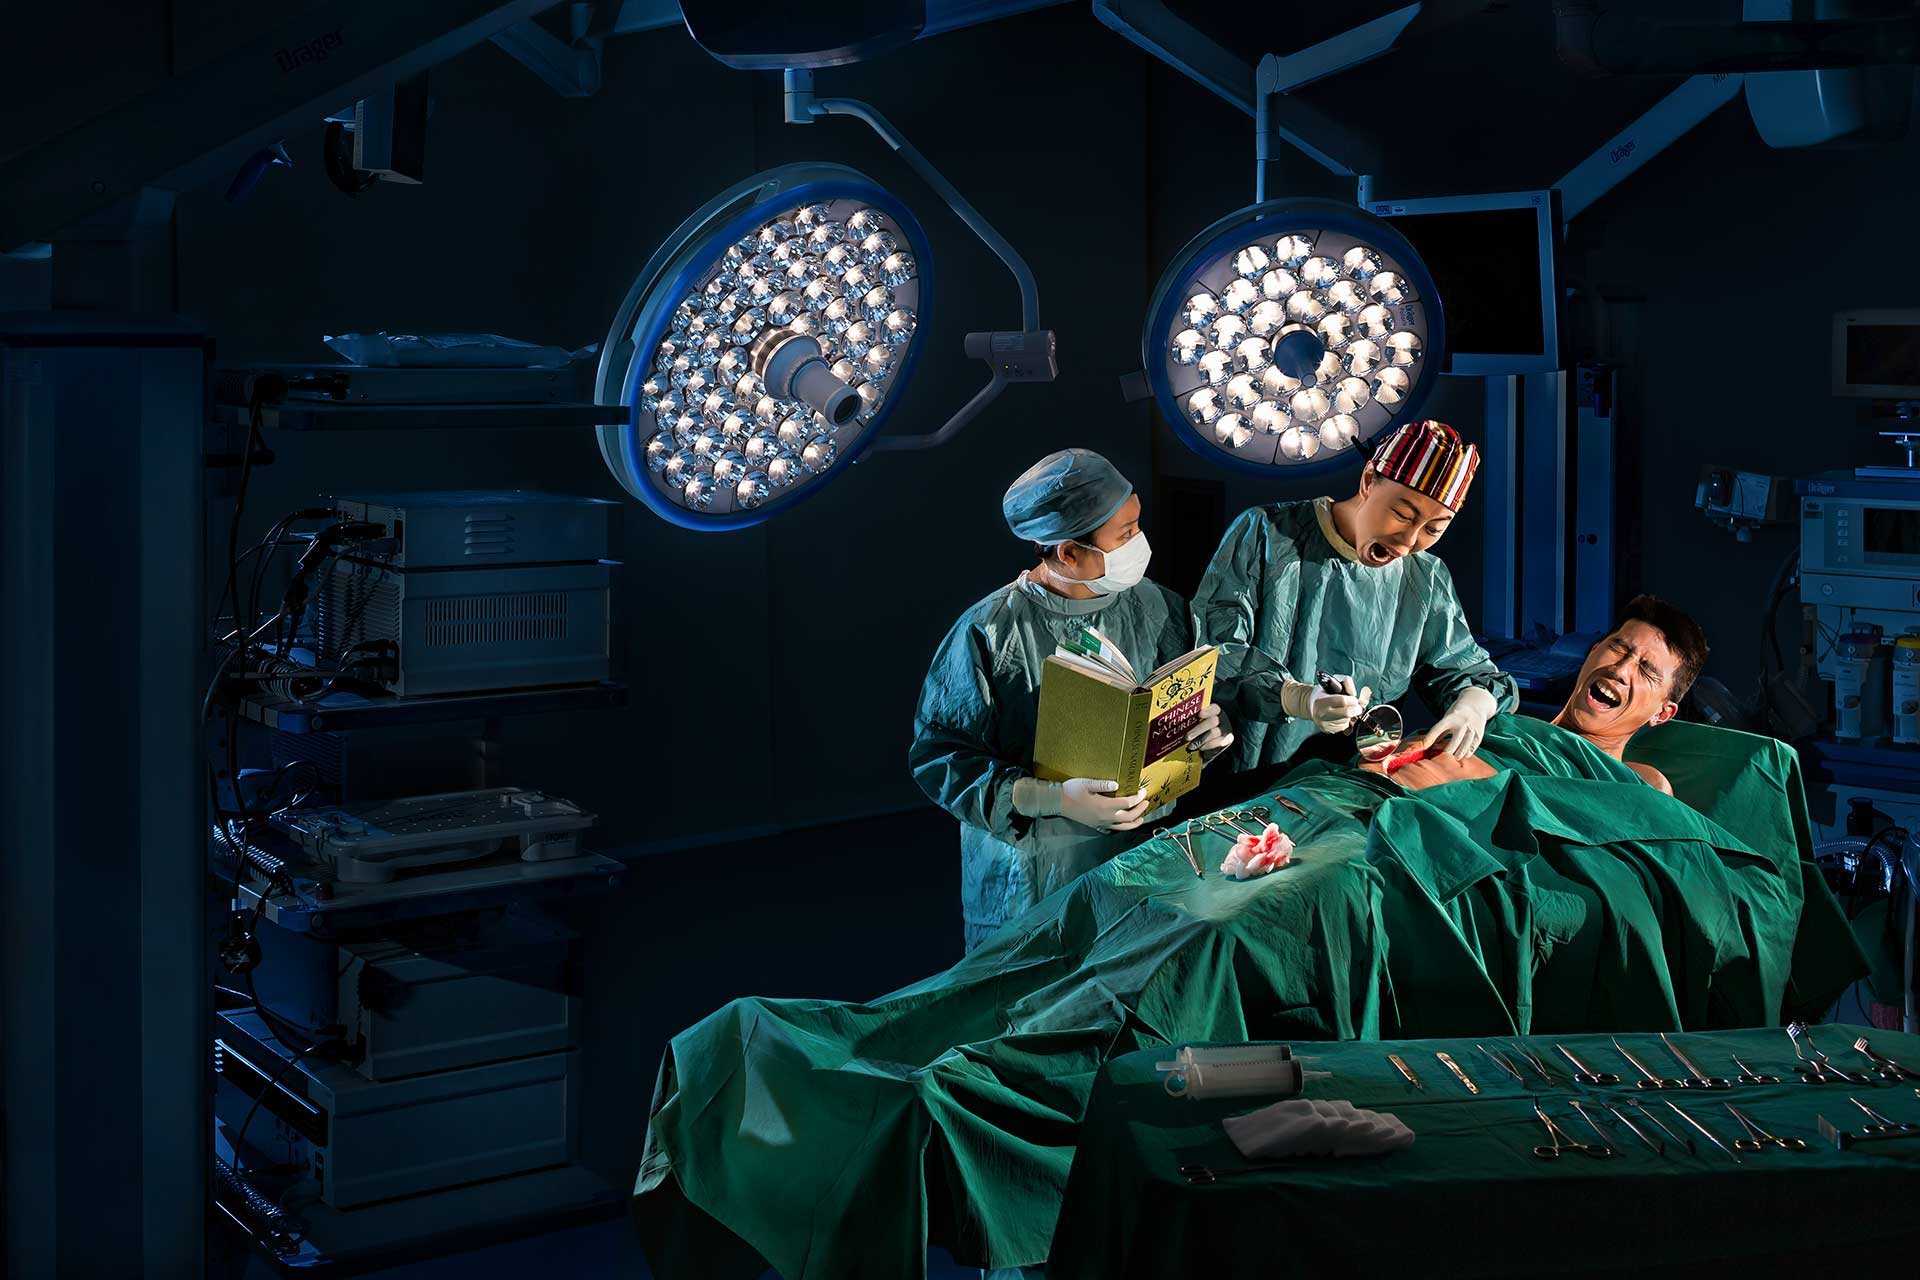 A surgeon performing surgery on a patient in an operating room during a creative photoshoot.